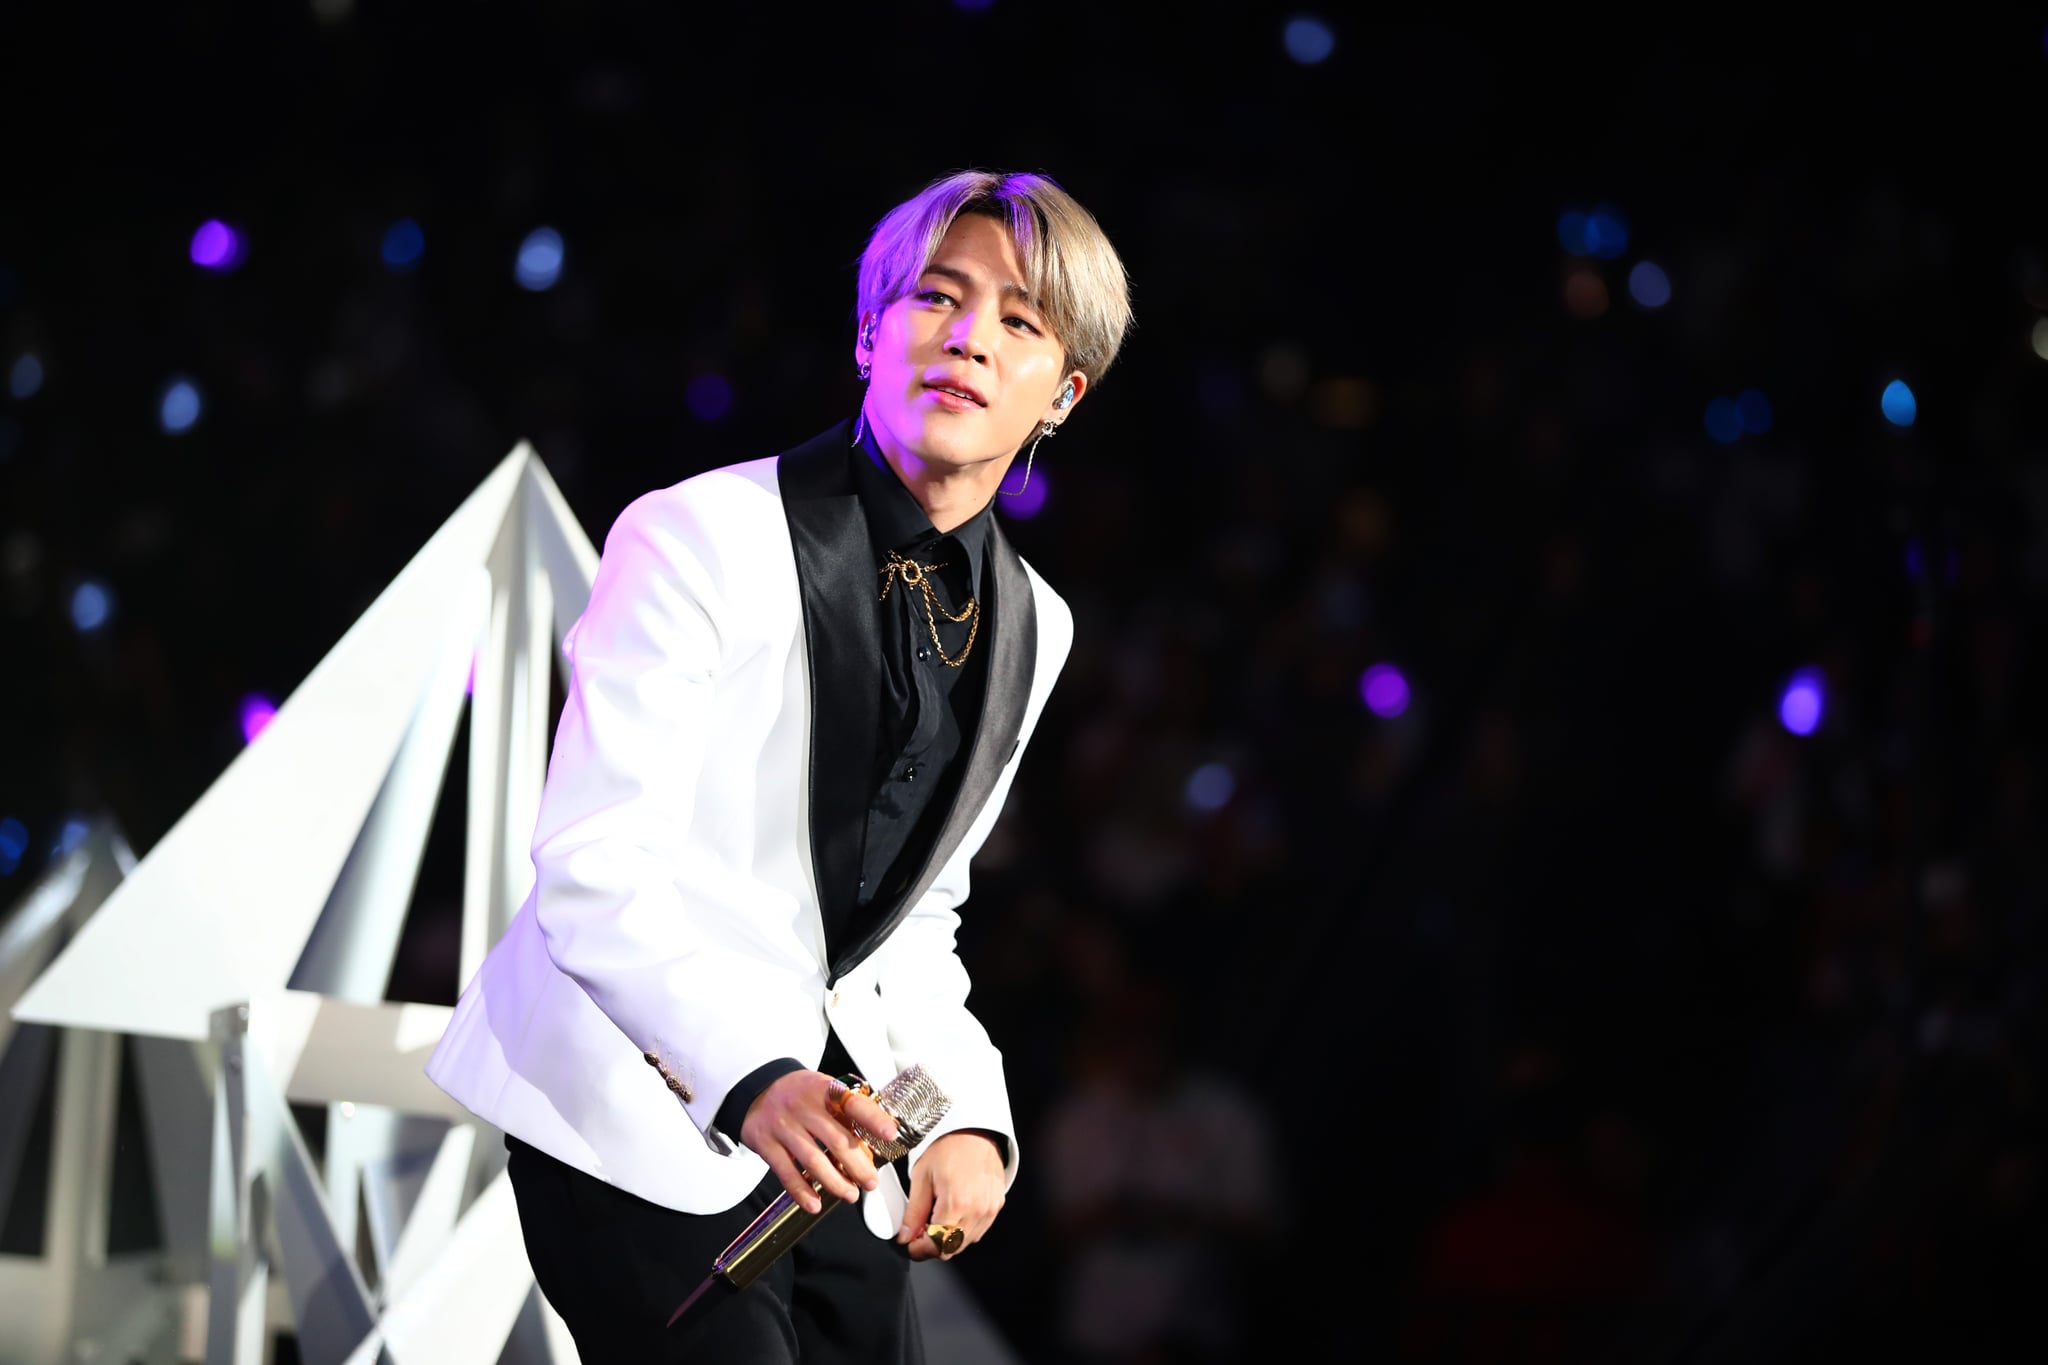 INGLEWOOD, CALIFORNIA - DECEMBER 06: (EDITORIAL USE ONLY. NO COMMERCIAL USE.) Jimin of BTS performs onstage during 102.7 KIIS FM's Jingle Ball 2019 Presented by Capital One at the Forum on December 6, 2019 in Los Angeles, California. (Photo by Rich Fury/Getty Images  for iHeartMedia)